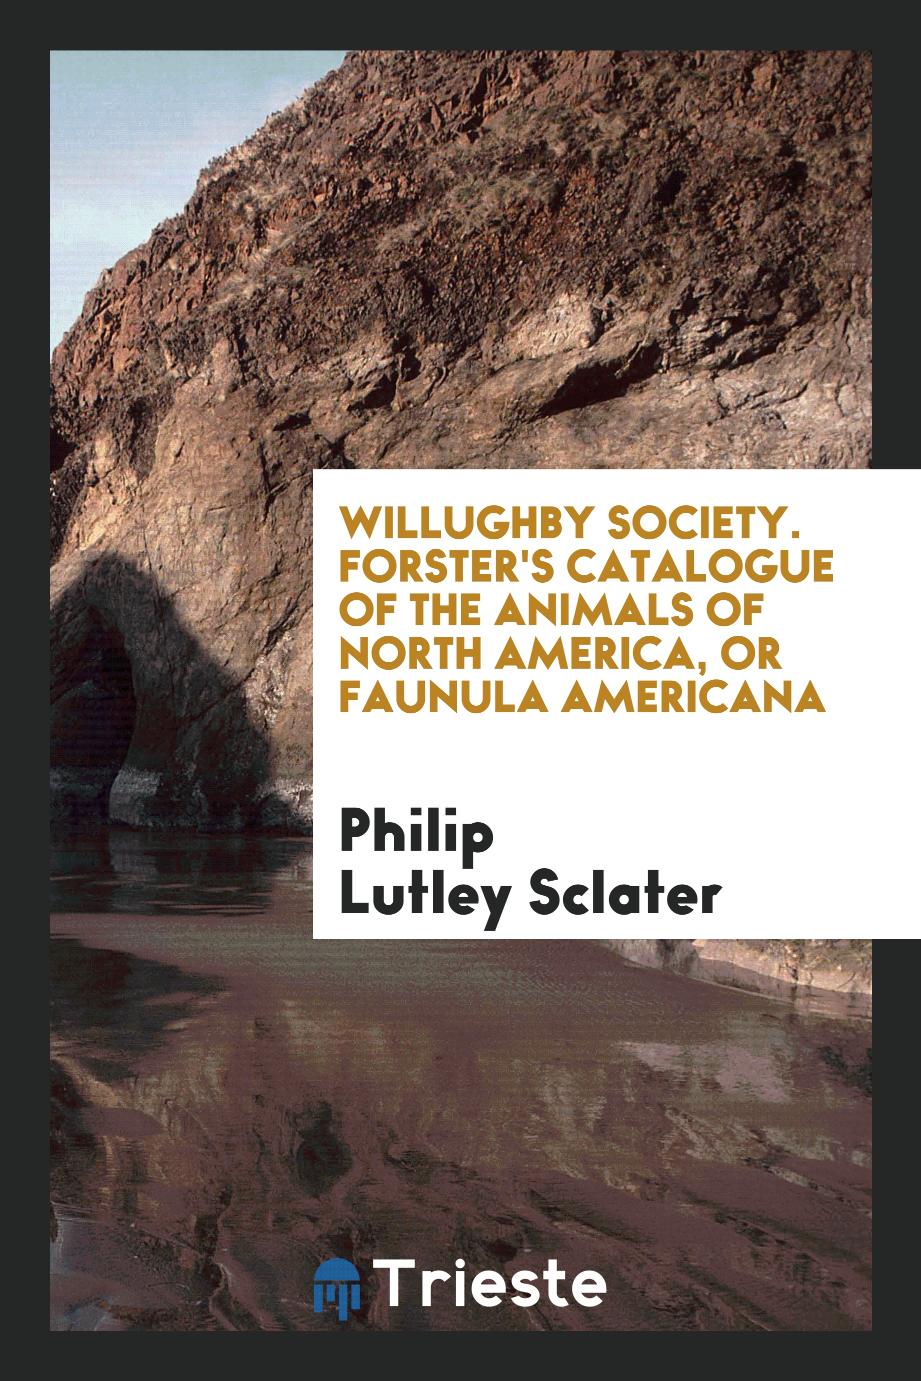 Willughby Society. Forster's catalogue of the animals of North America, or Faunula americana